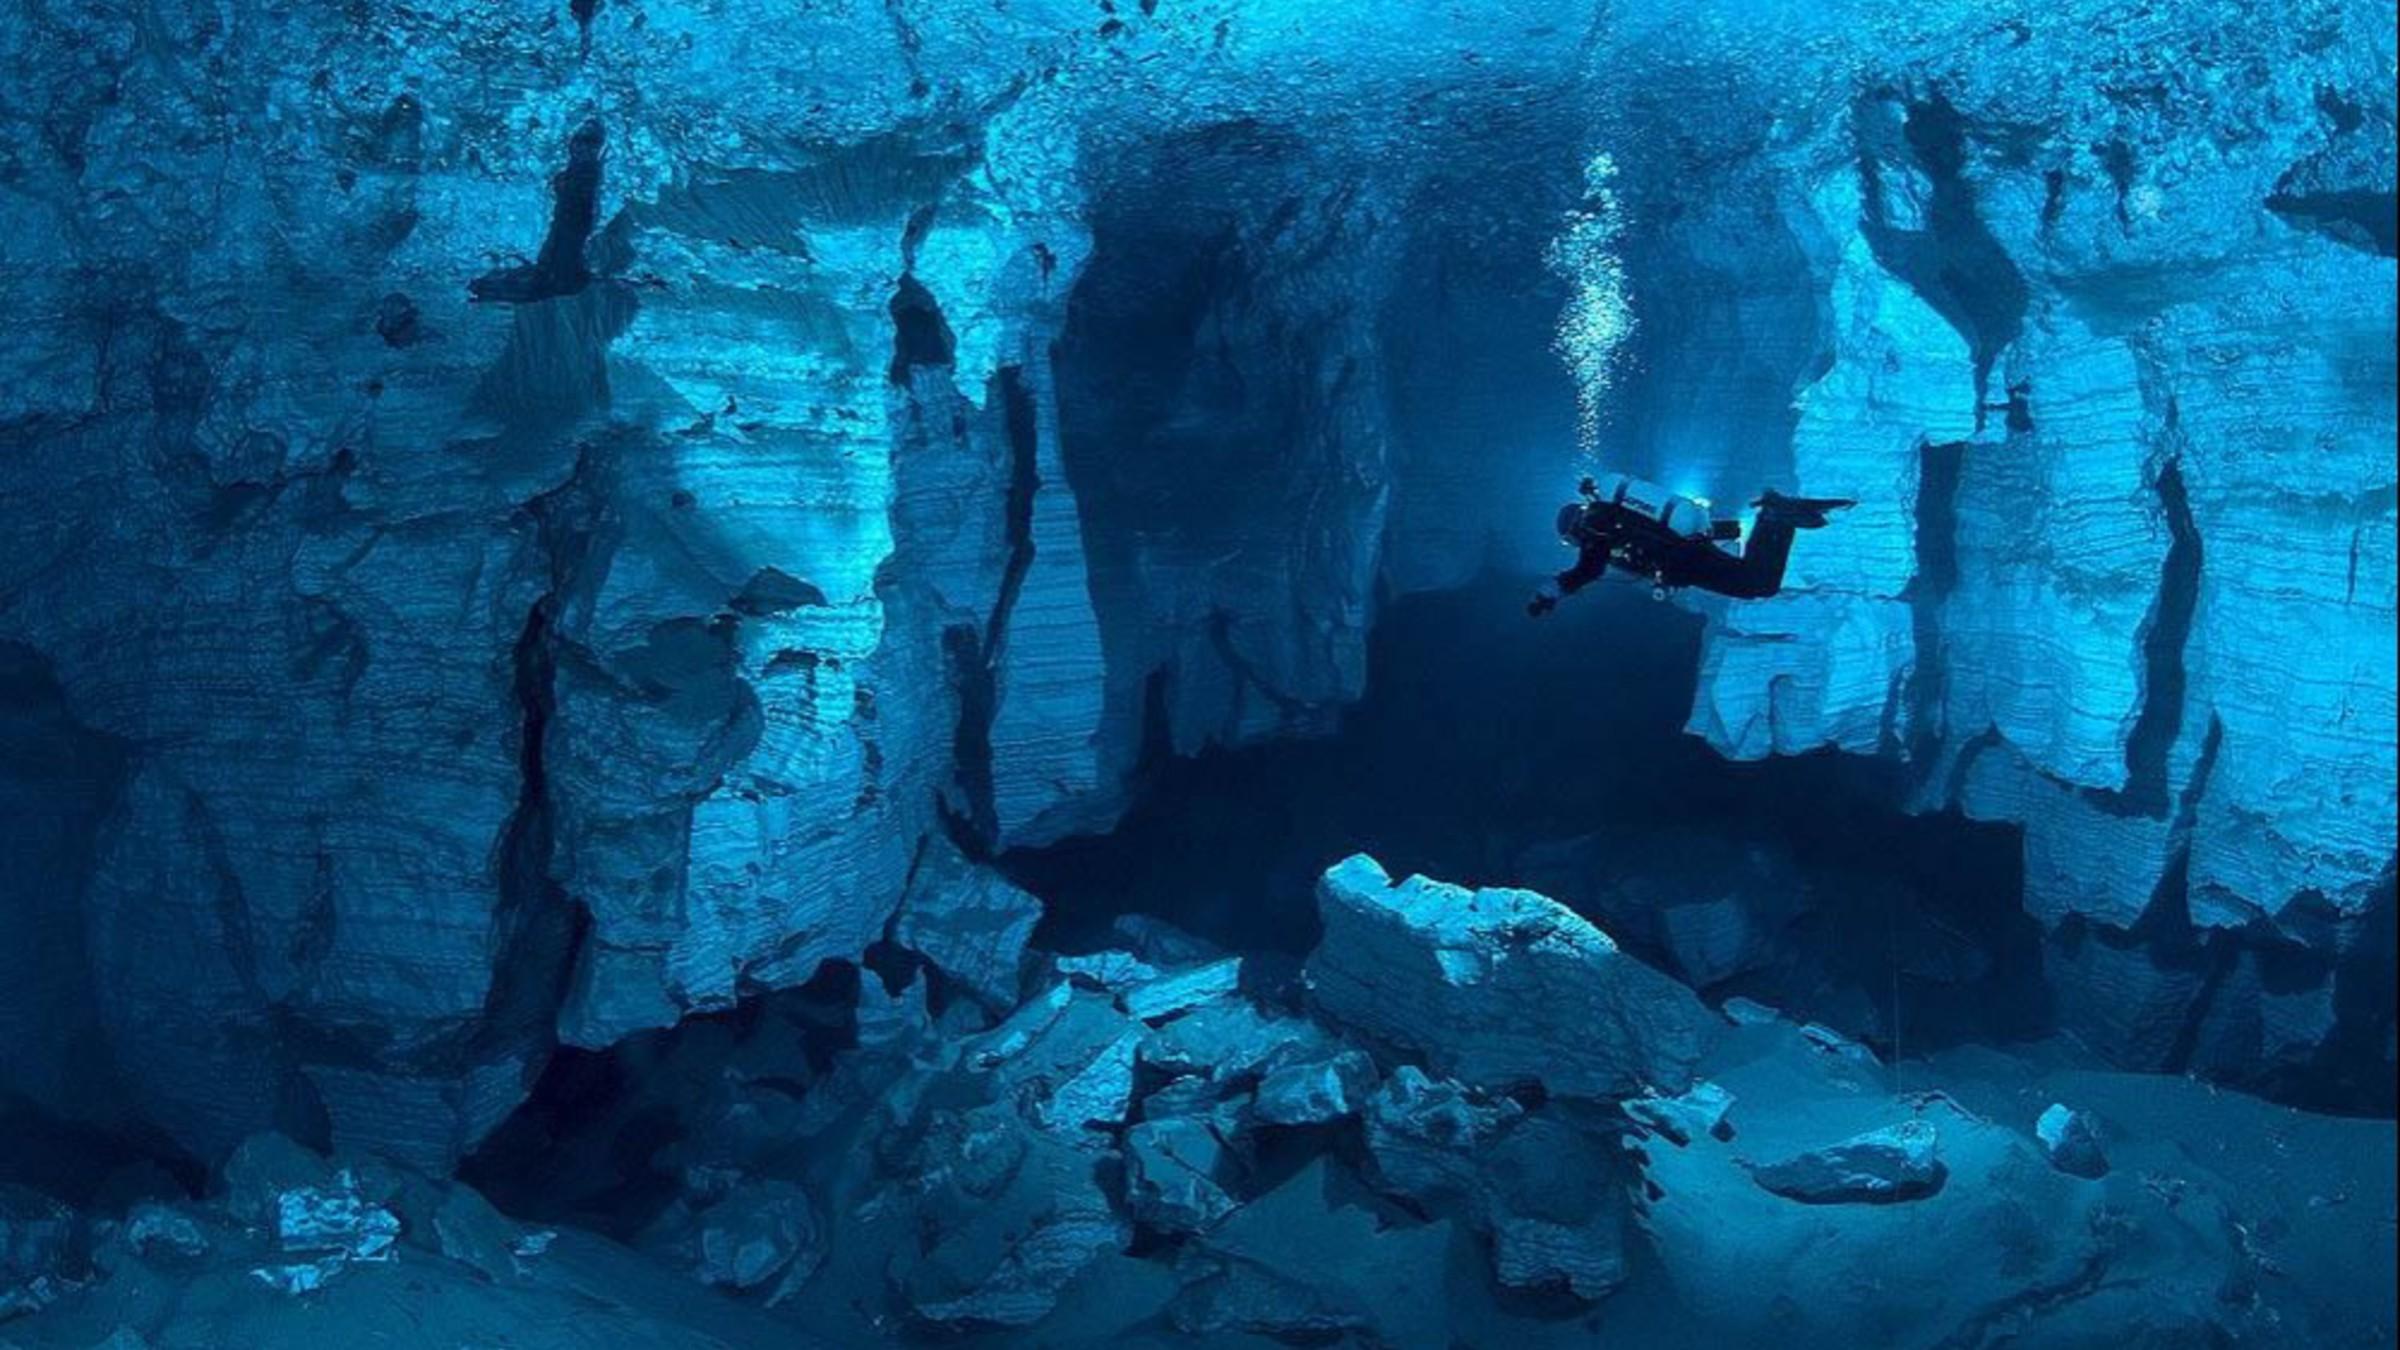 Landscapes cave russia underwater wallpaper